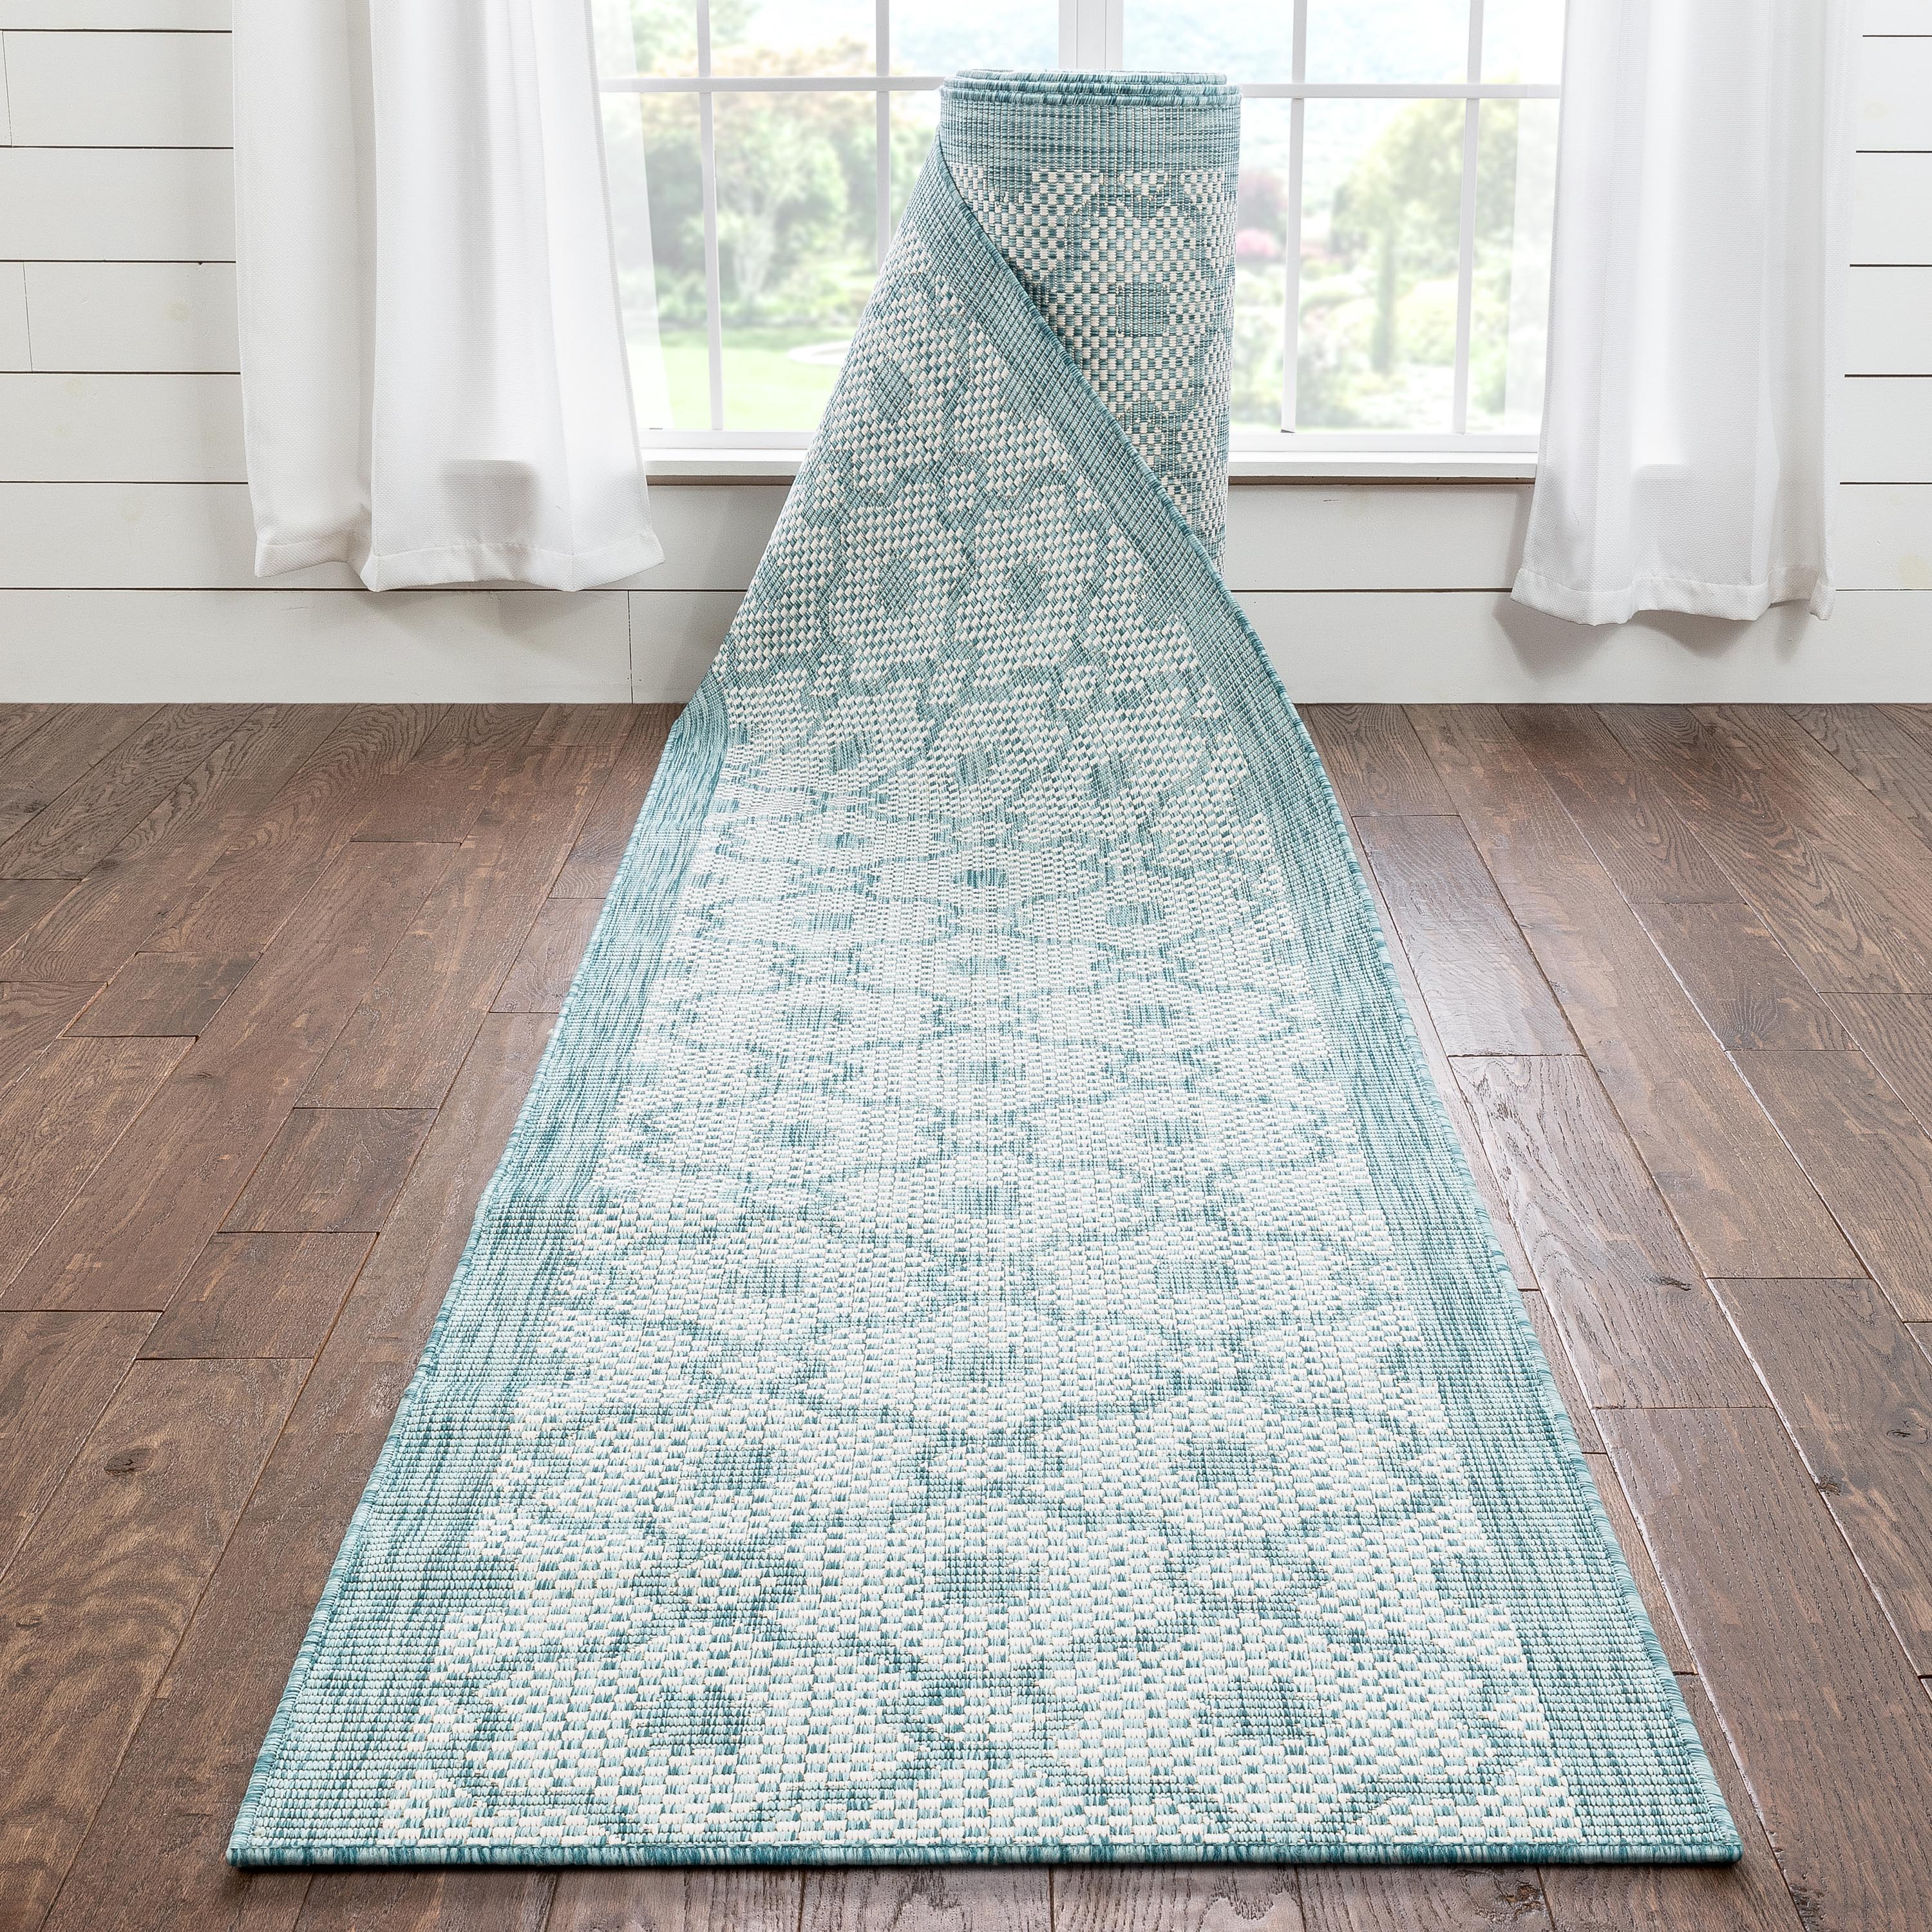 Custom Size Runner Sol Nordic Geometric Pattern Light Blue 31 Inches Width x Choose Your Length Hallway Indoor/Outdoor Runner Rug